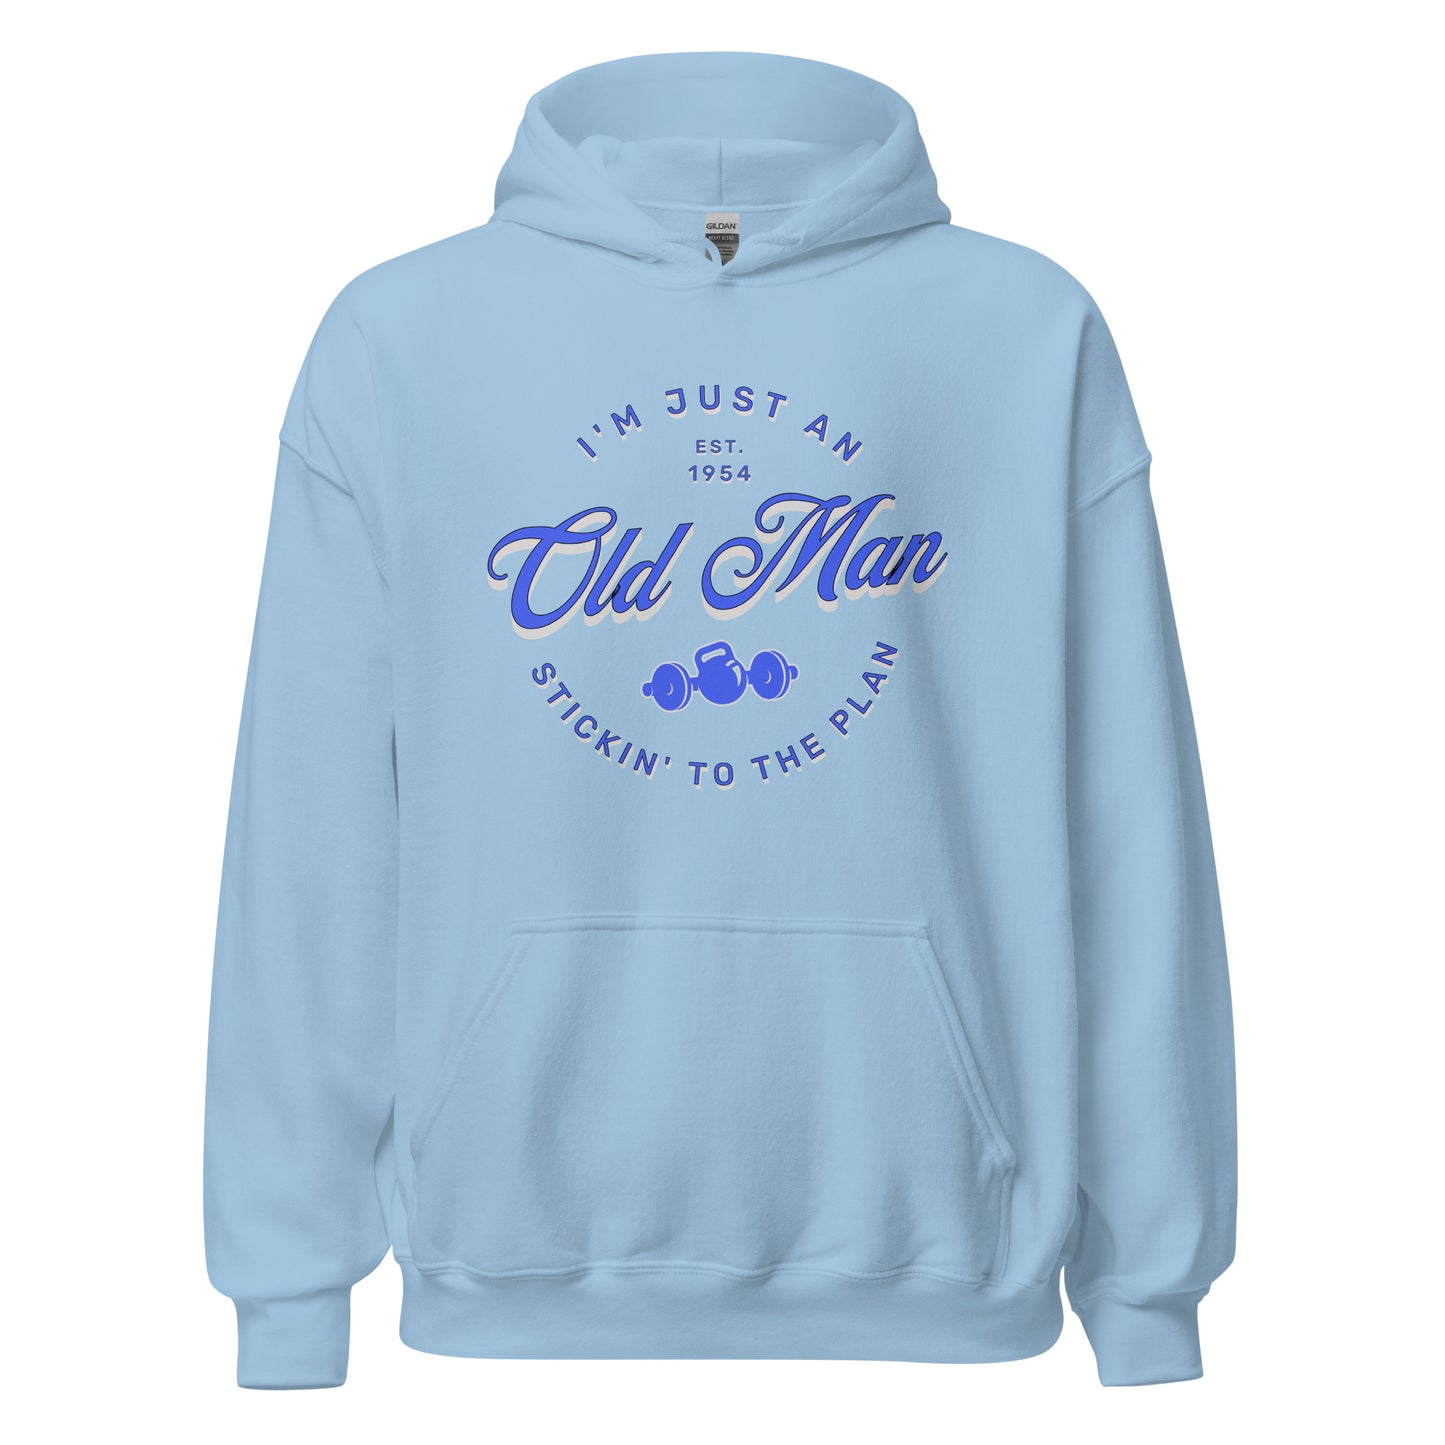 I'm Just an Old Man Unisex Hoodie